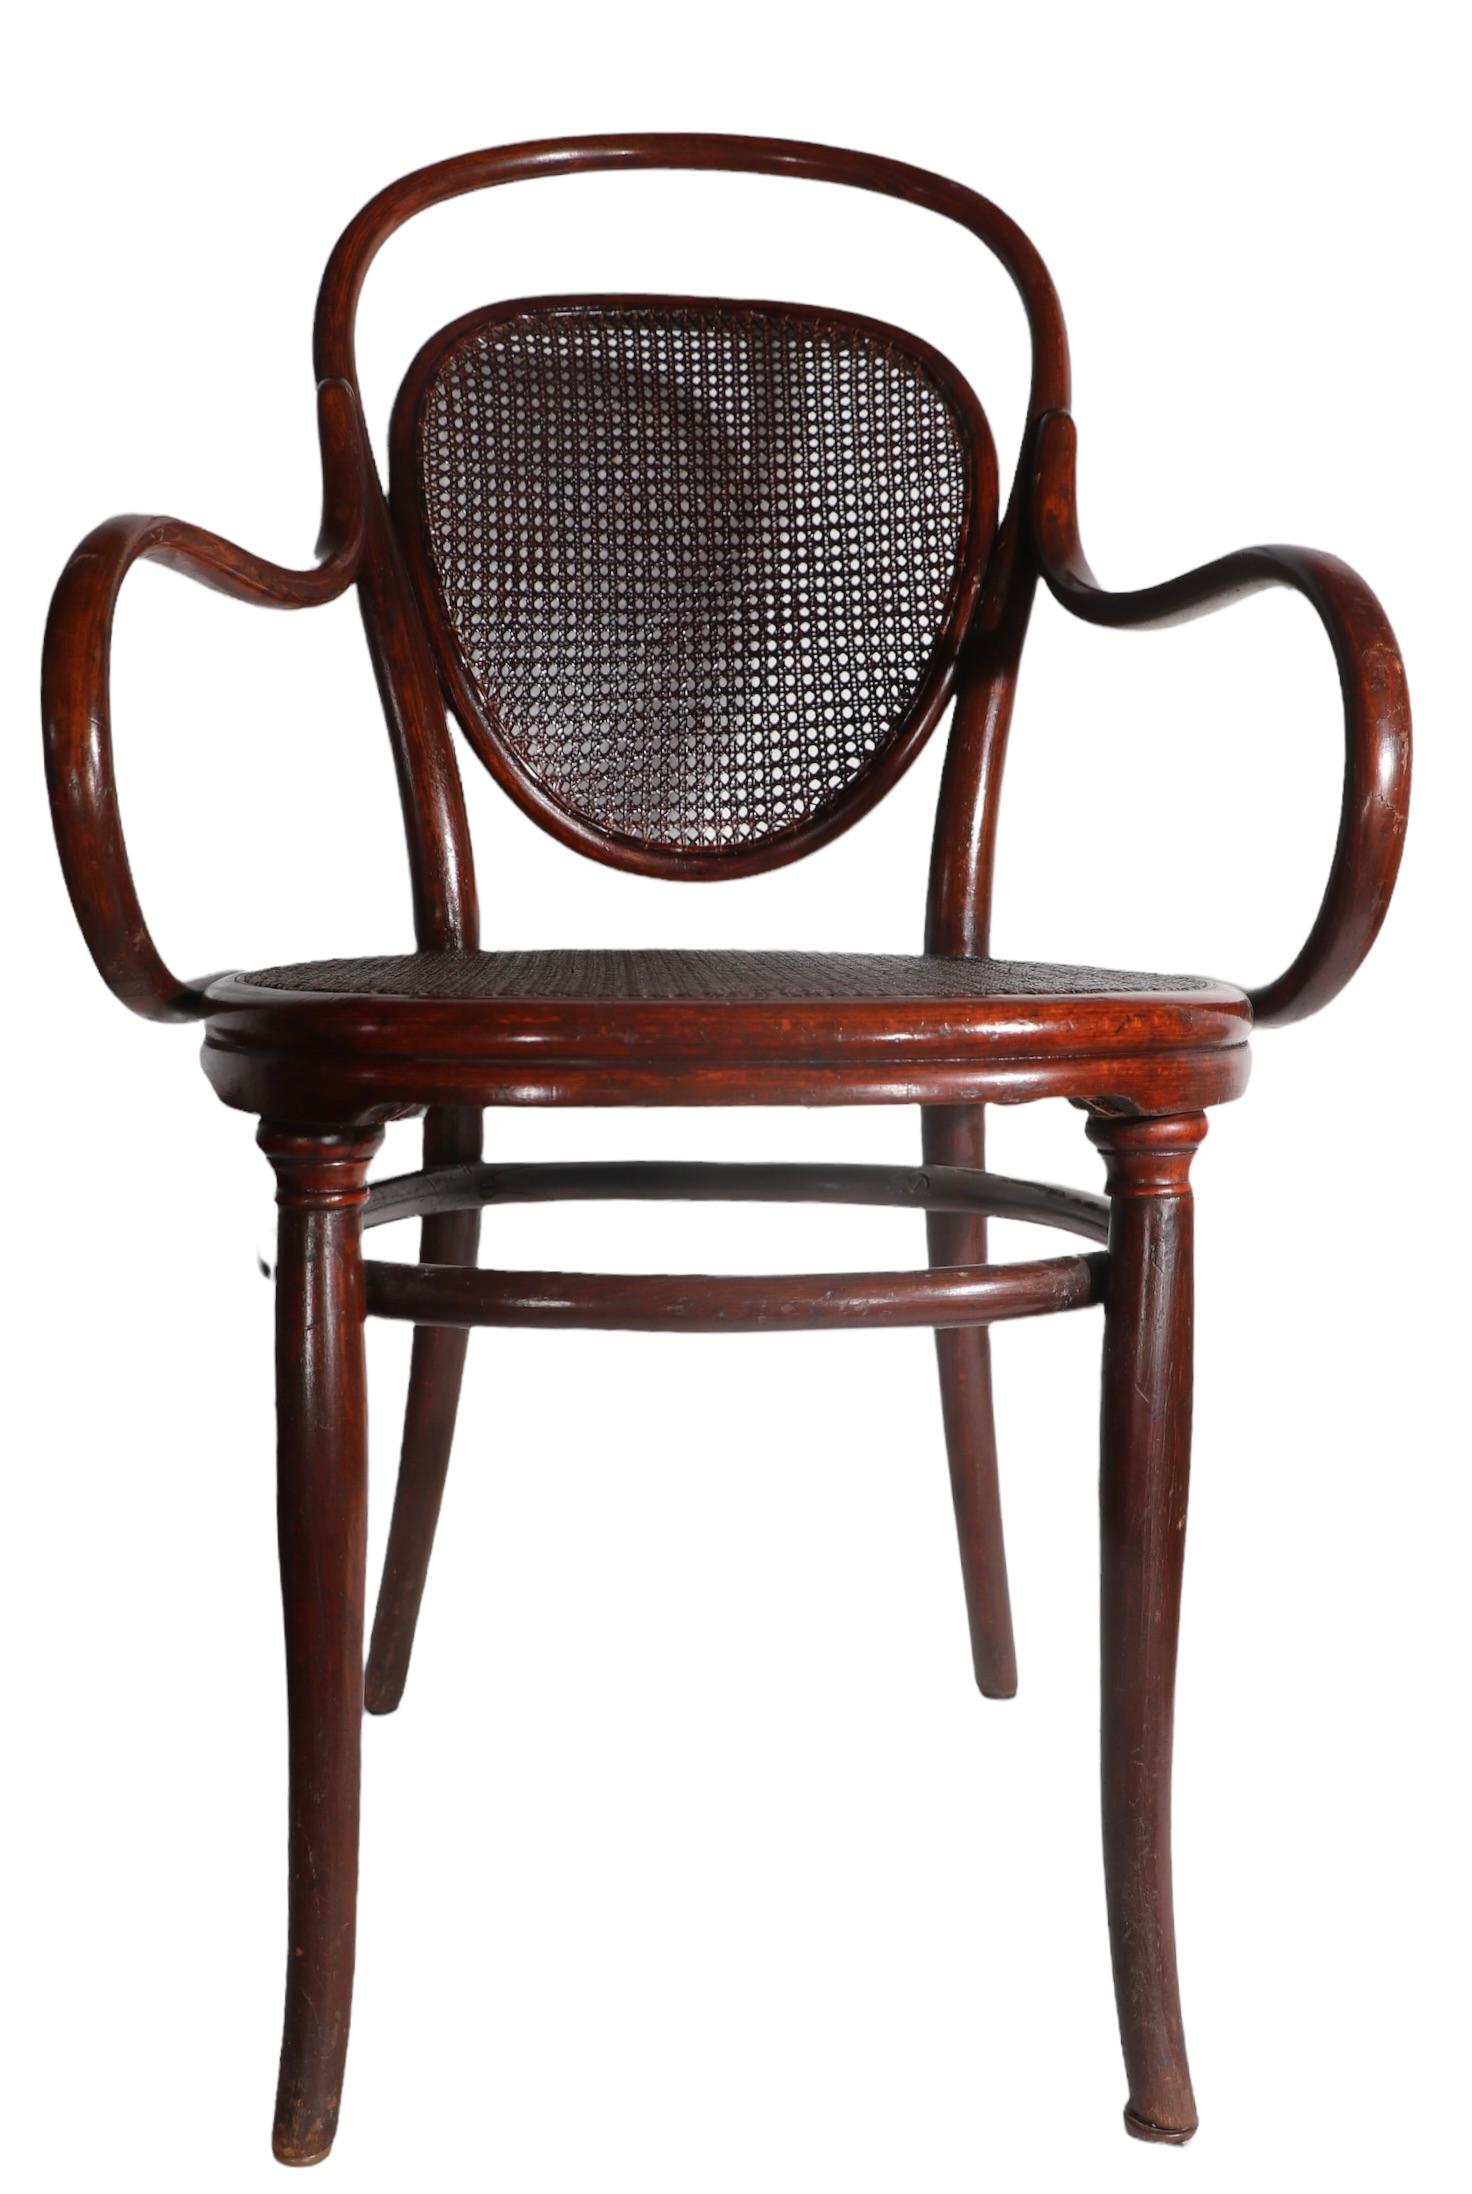 Austrian Vienna Secessionist Bentwood Arm Chair Att. to J & J Kohn in the Style of Thonet